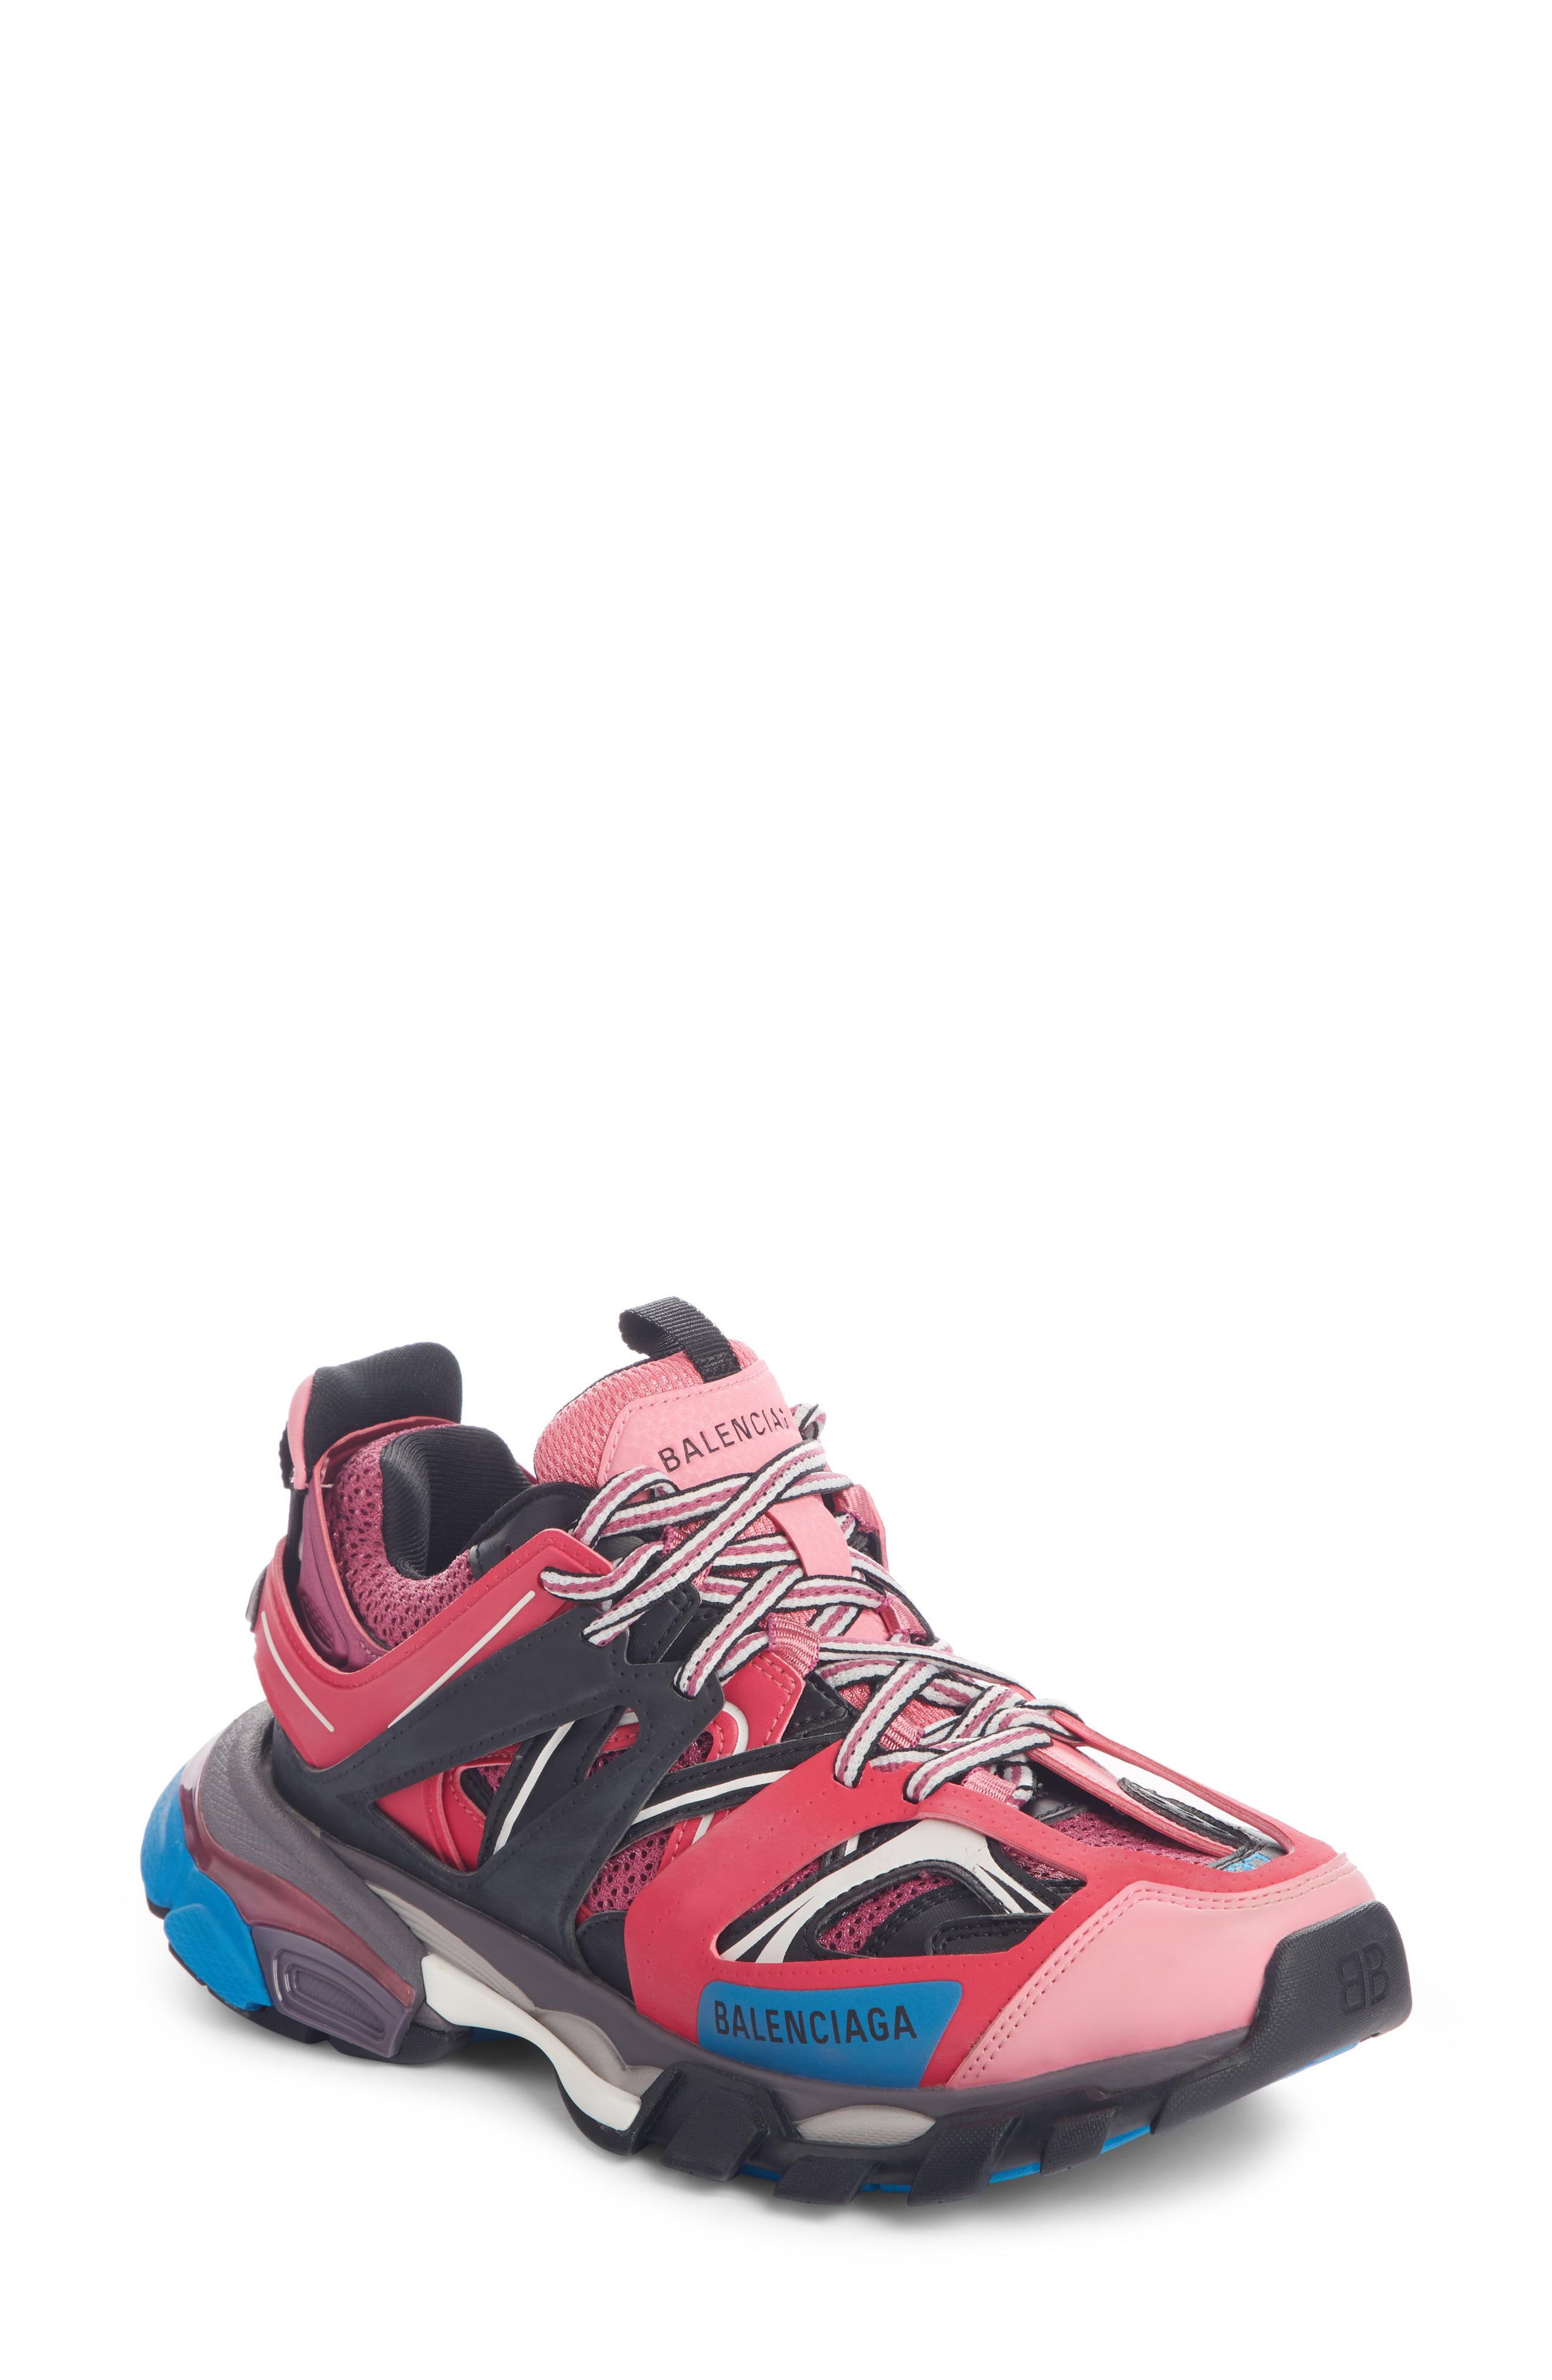 Balenciaga Track Sneakers in Pink/Blue (Pink) - Lyst